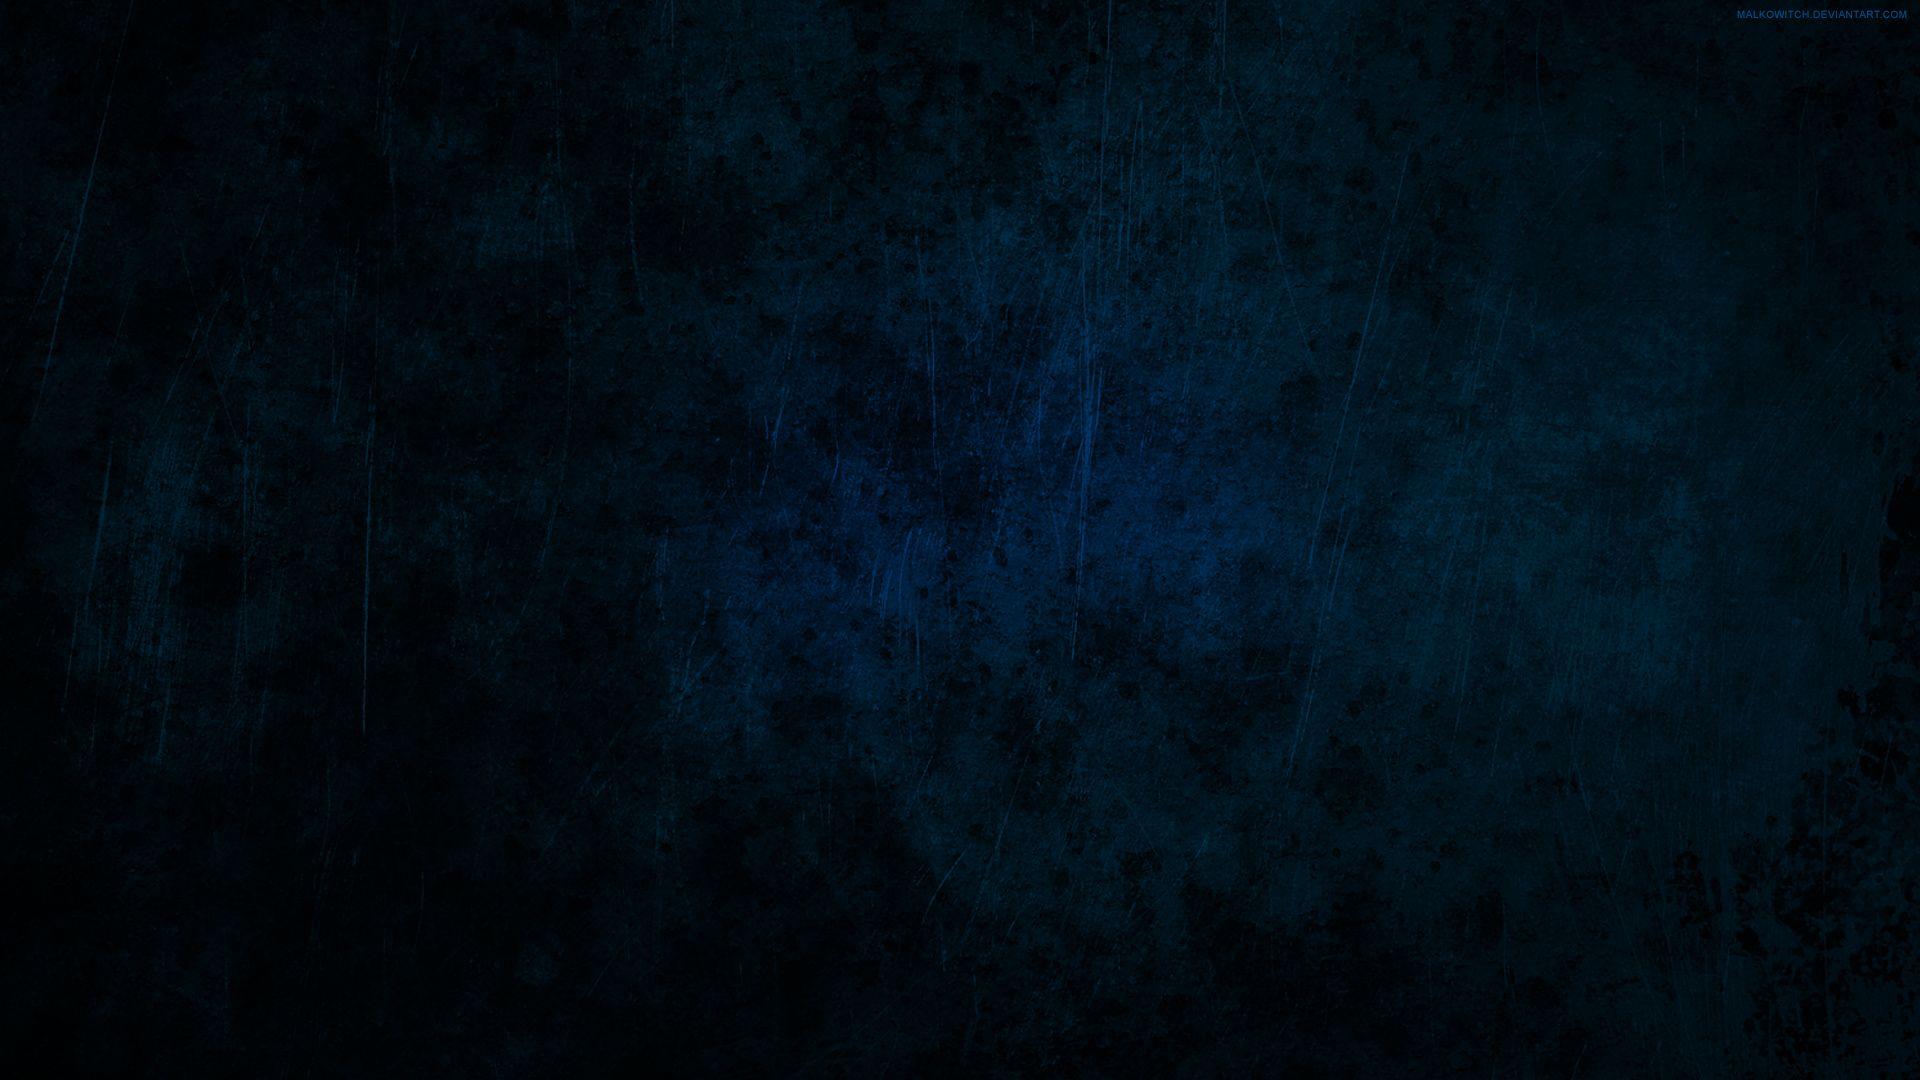 Download premium image of Midnight blue textured background by katie about midnight  blue tex  Blue texture background Textured background Blue abstract  painting